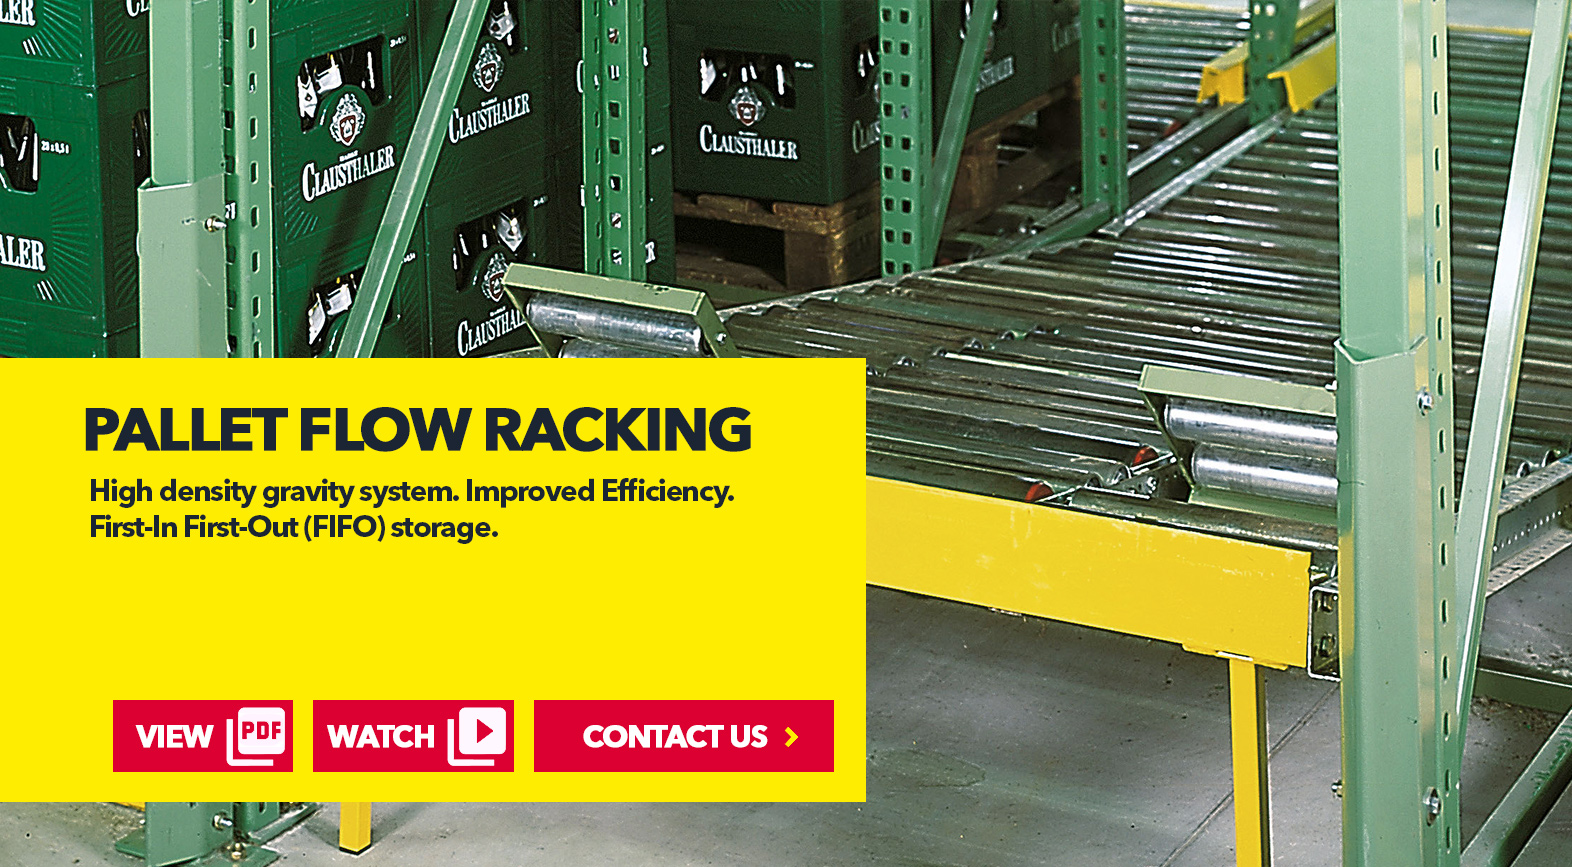 Pallet Flow Racking by SSI Schaefer USA Download Guide, Watch Video, Contact Us. www.chaefershelving.com